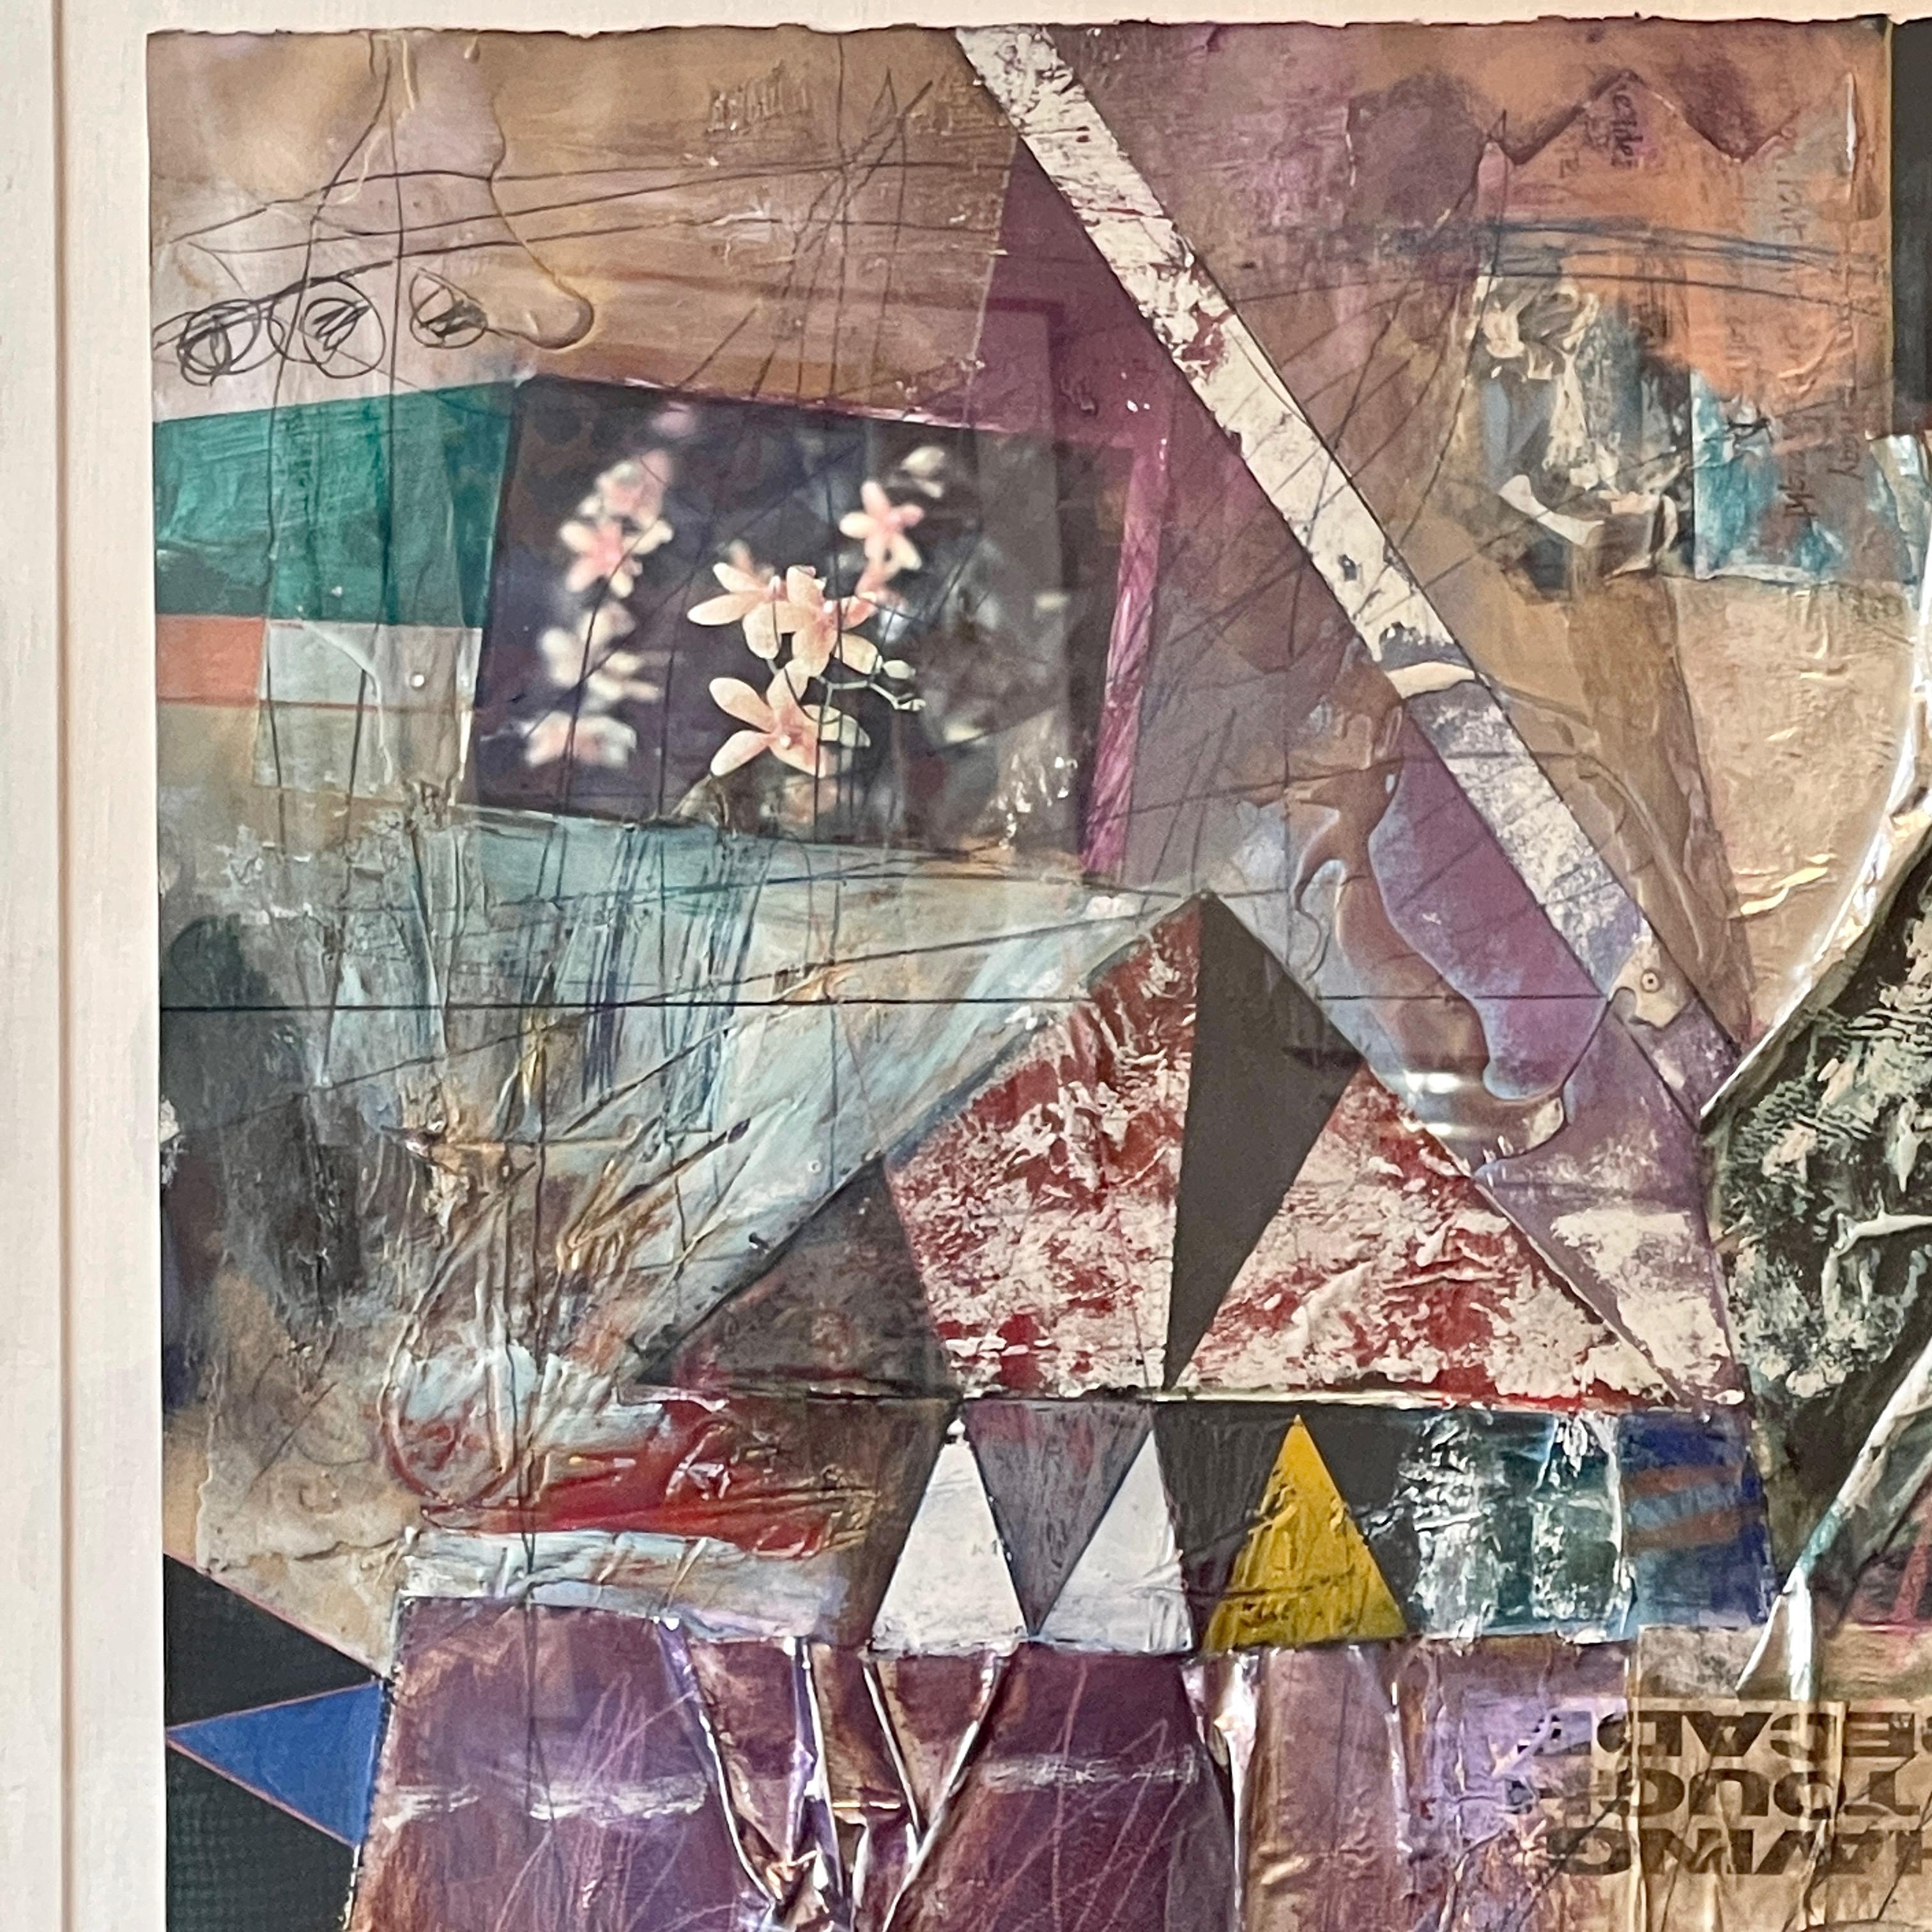 Abstract Postmodern Mixed Media Collage 'Charms and the Man' by Patricia Beatty 4